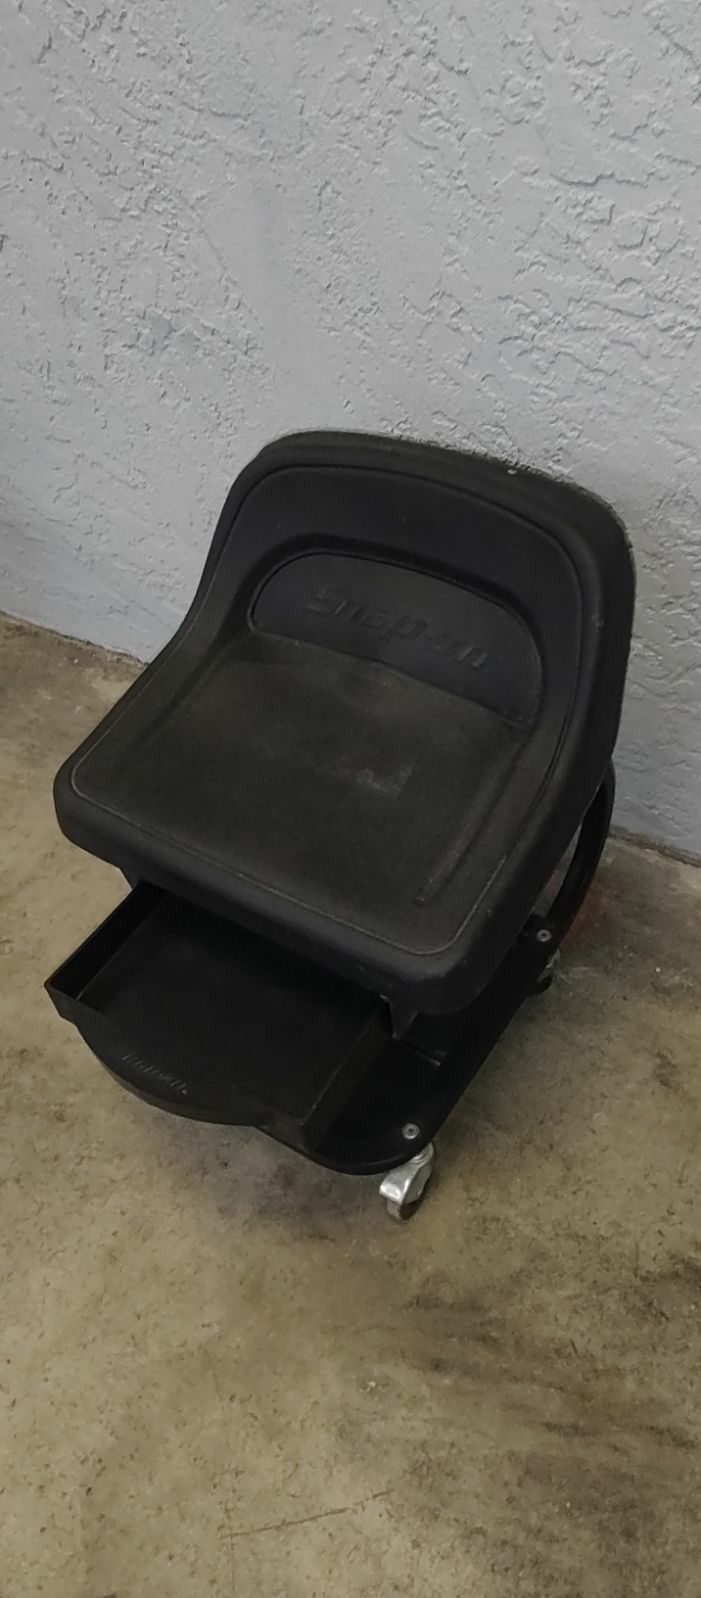 snap on roll around chair 150 obo